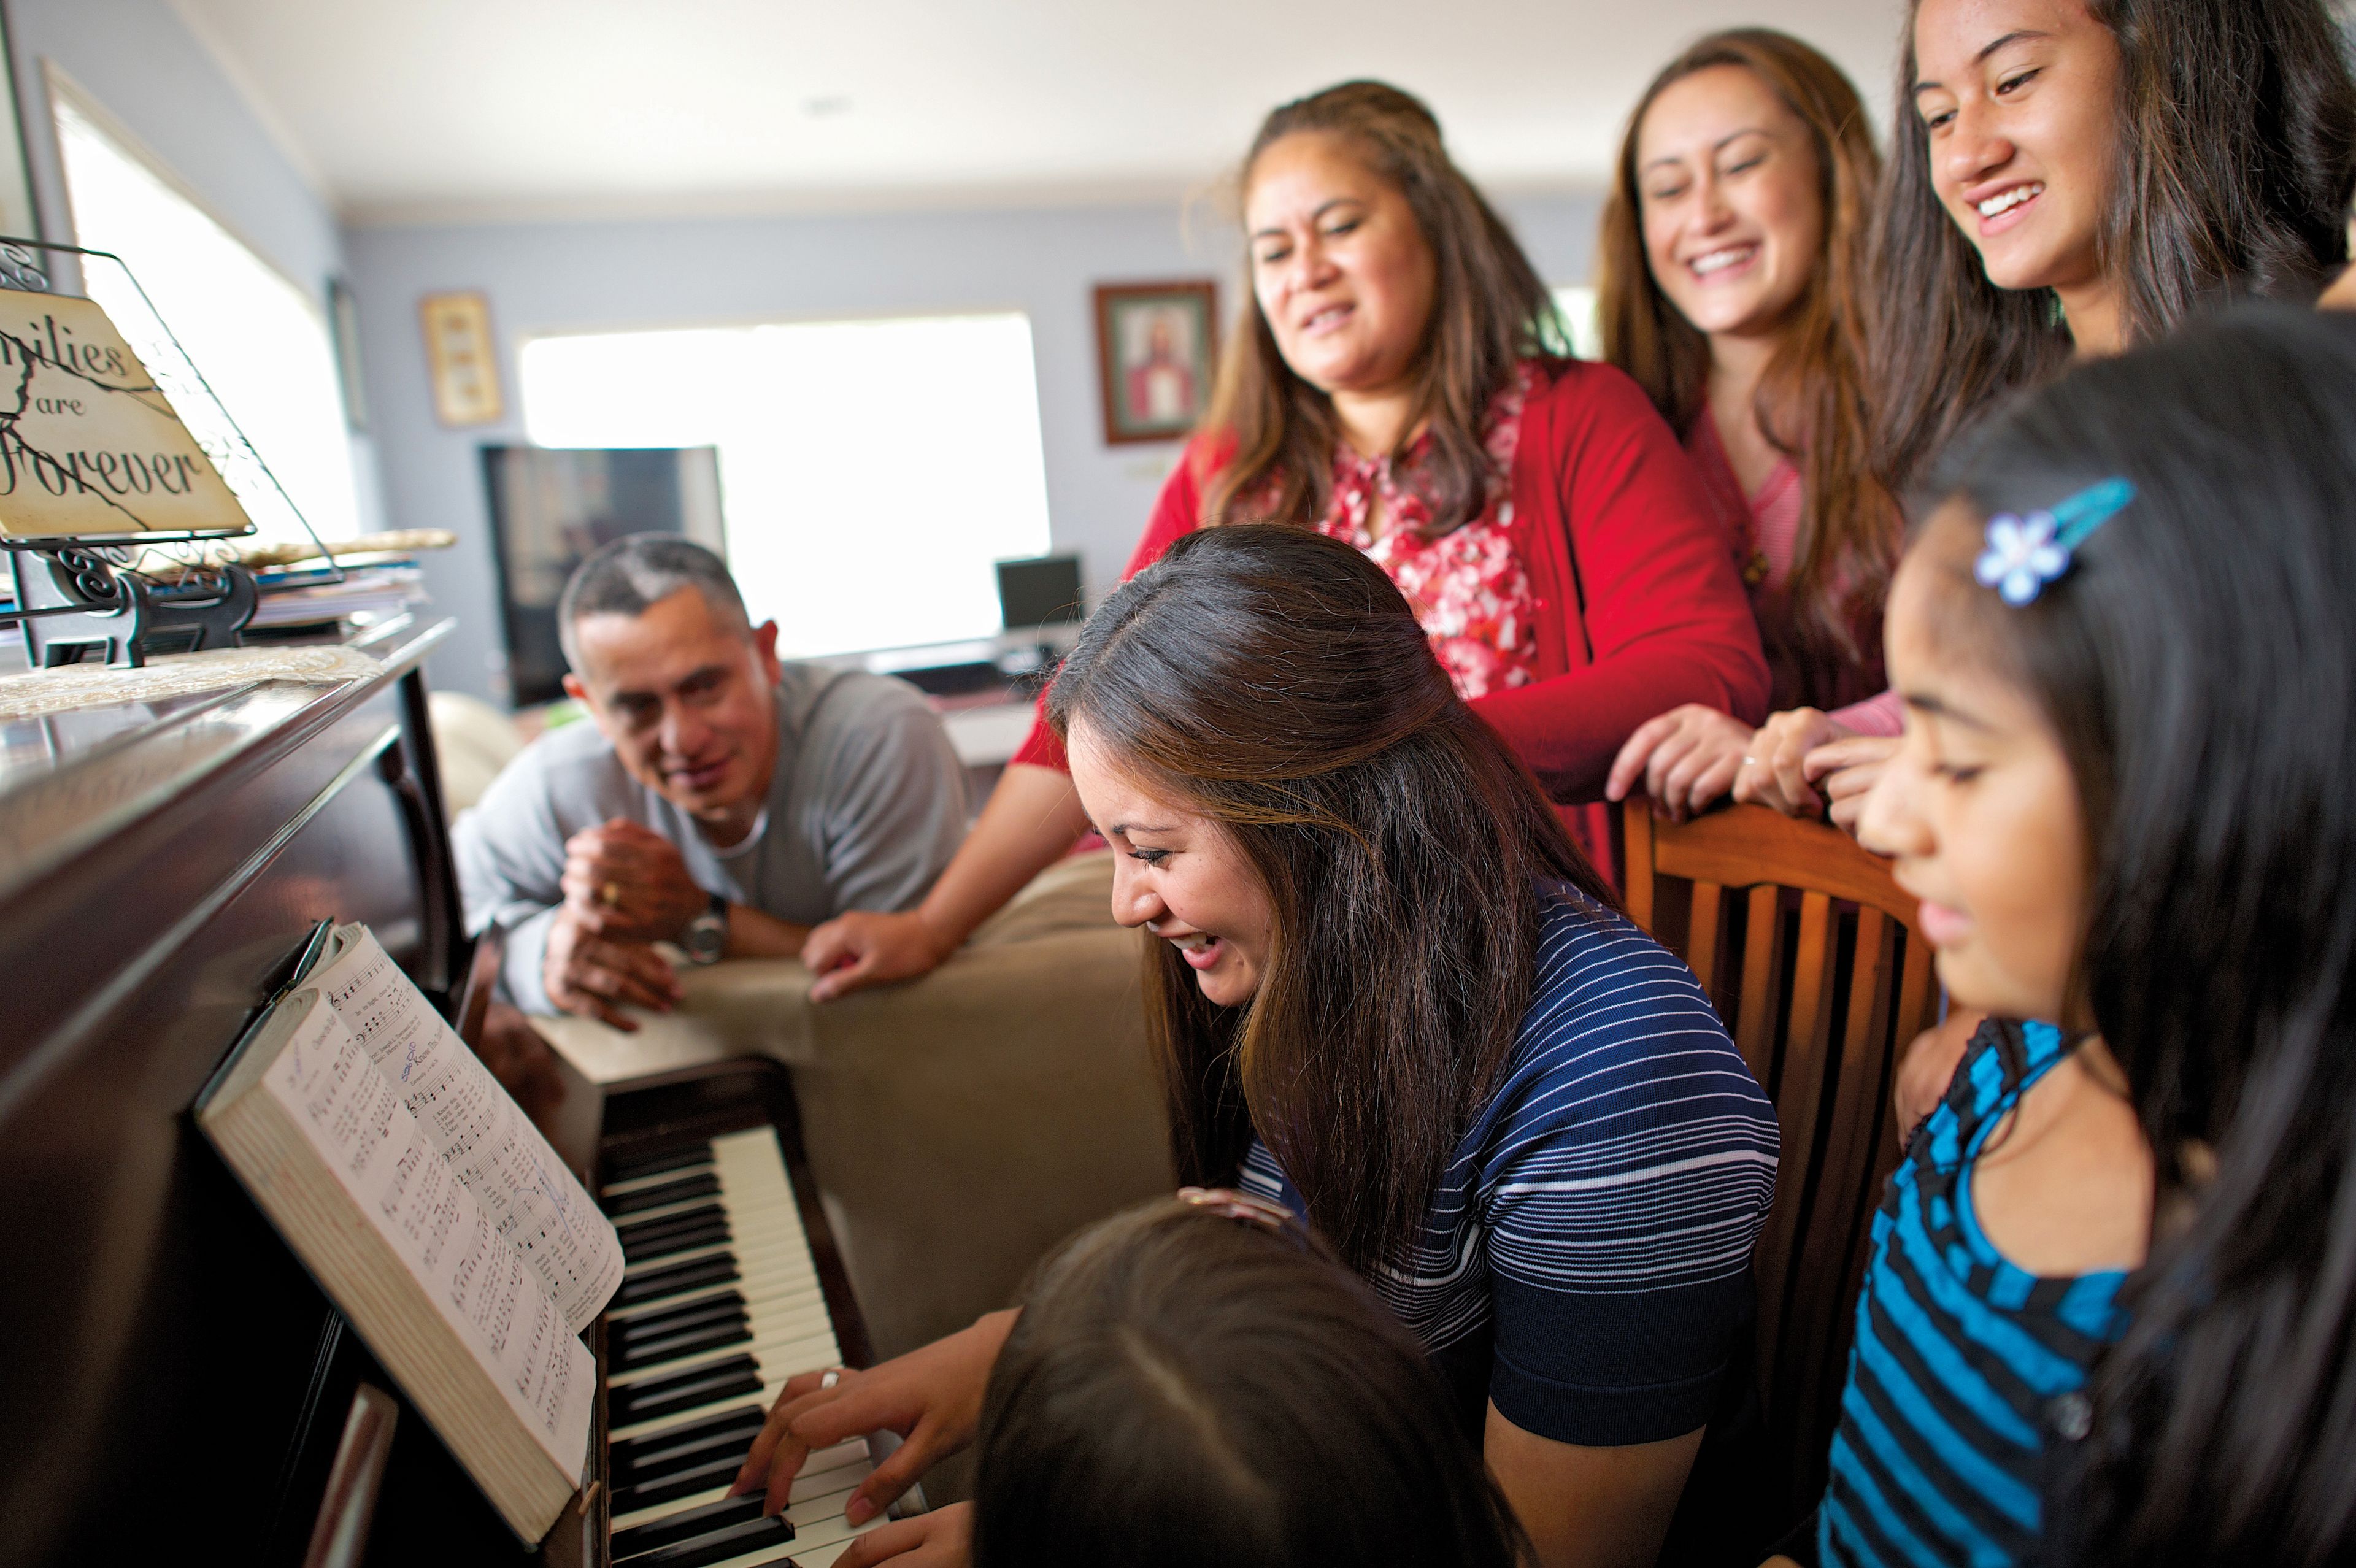 A family gathers around the piano and sings together as a daughter plays.